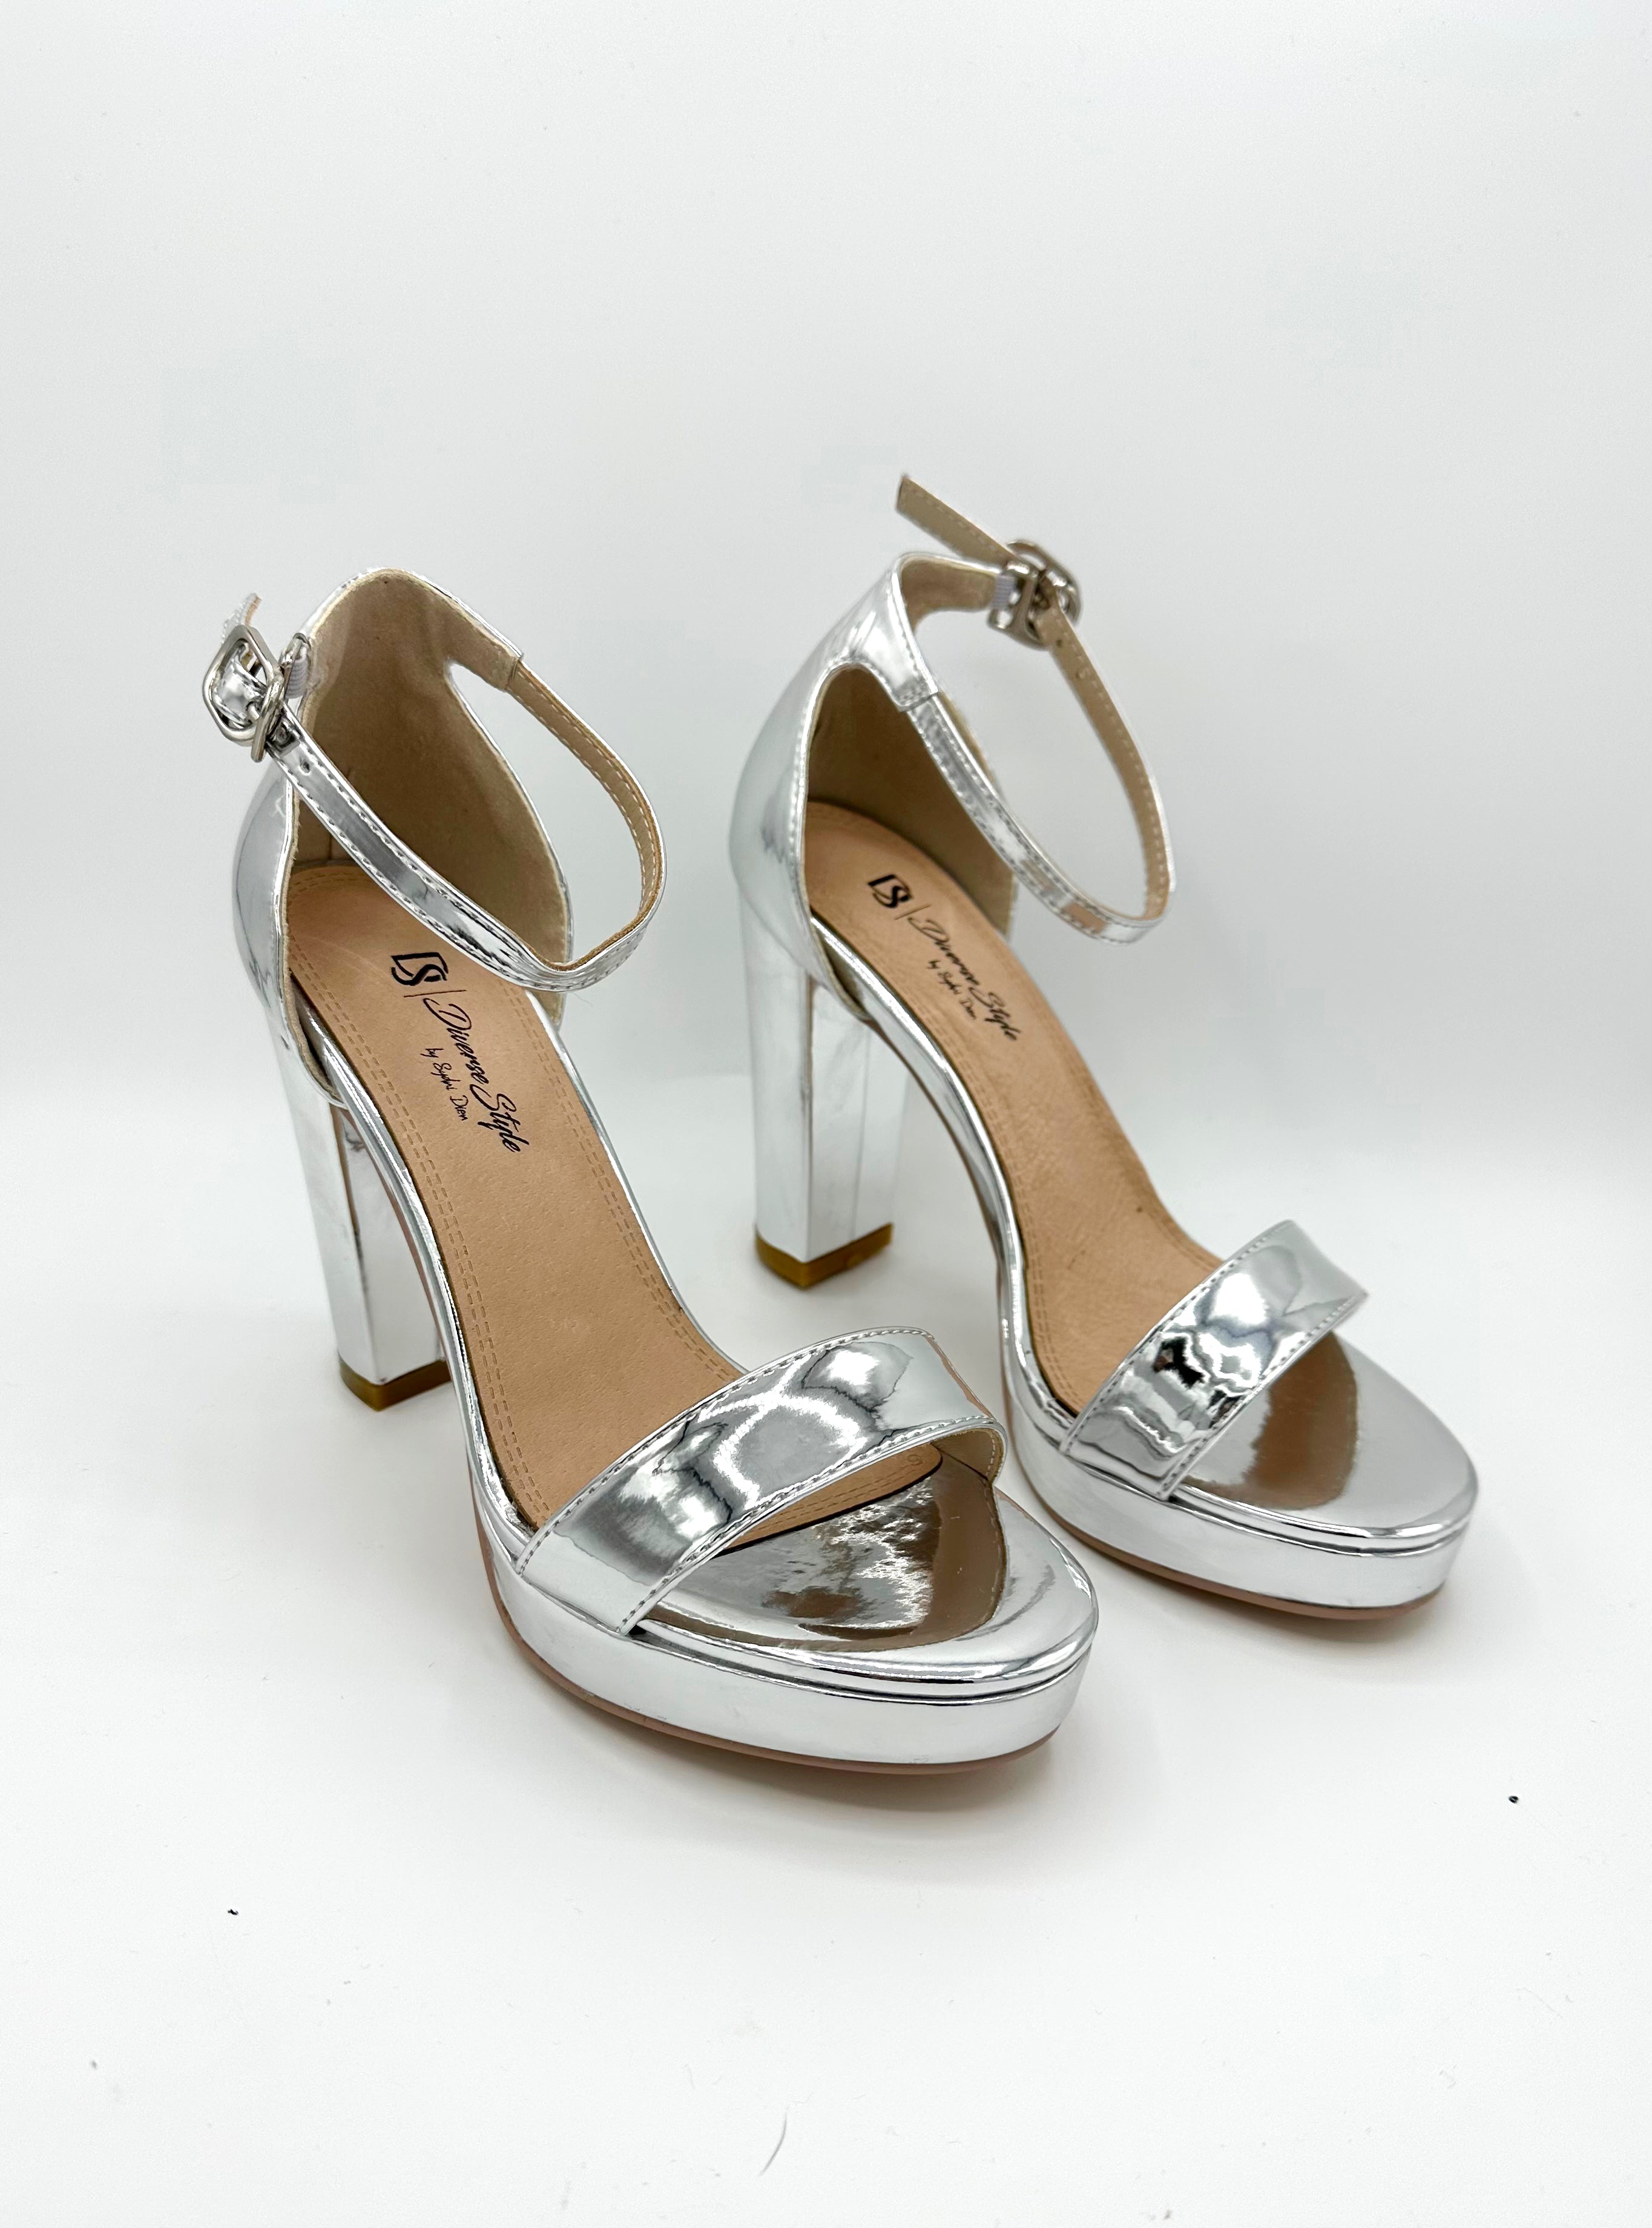 Silver Sandals - Silver Heels - Strappy Sandals - Bridal Shoes - Lulus